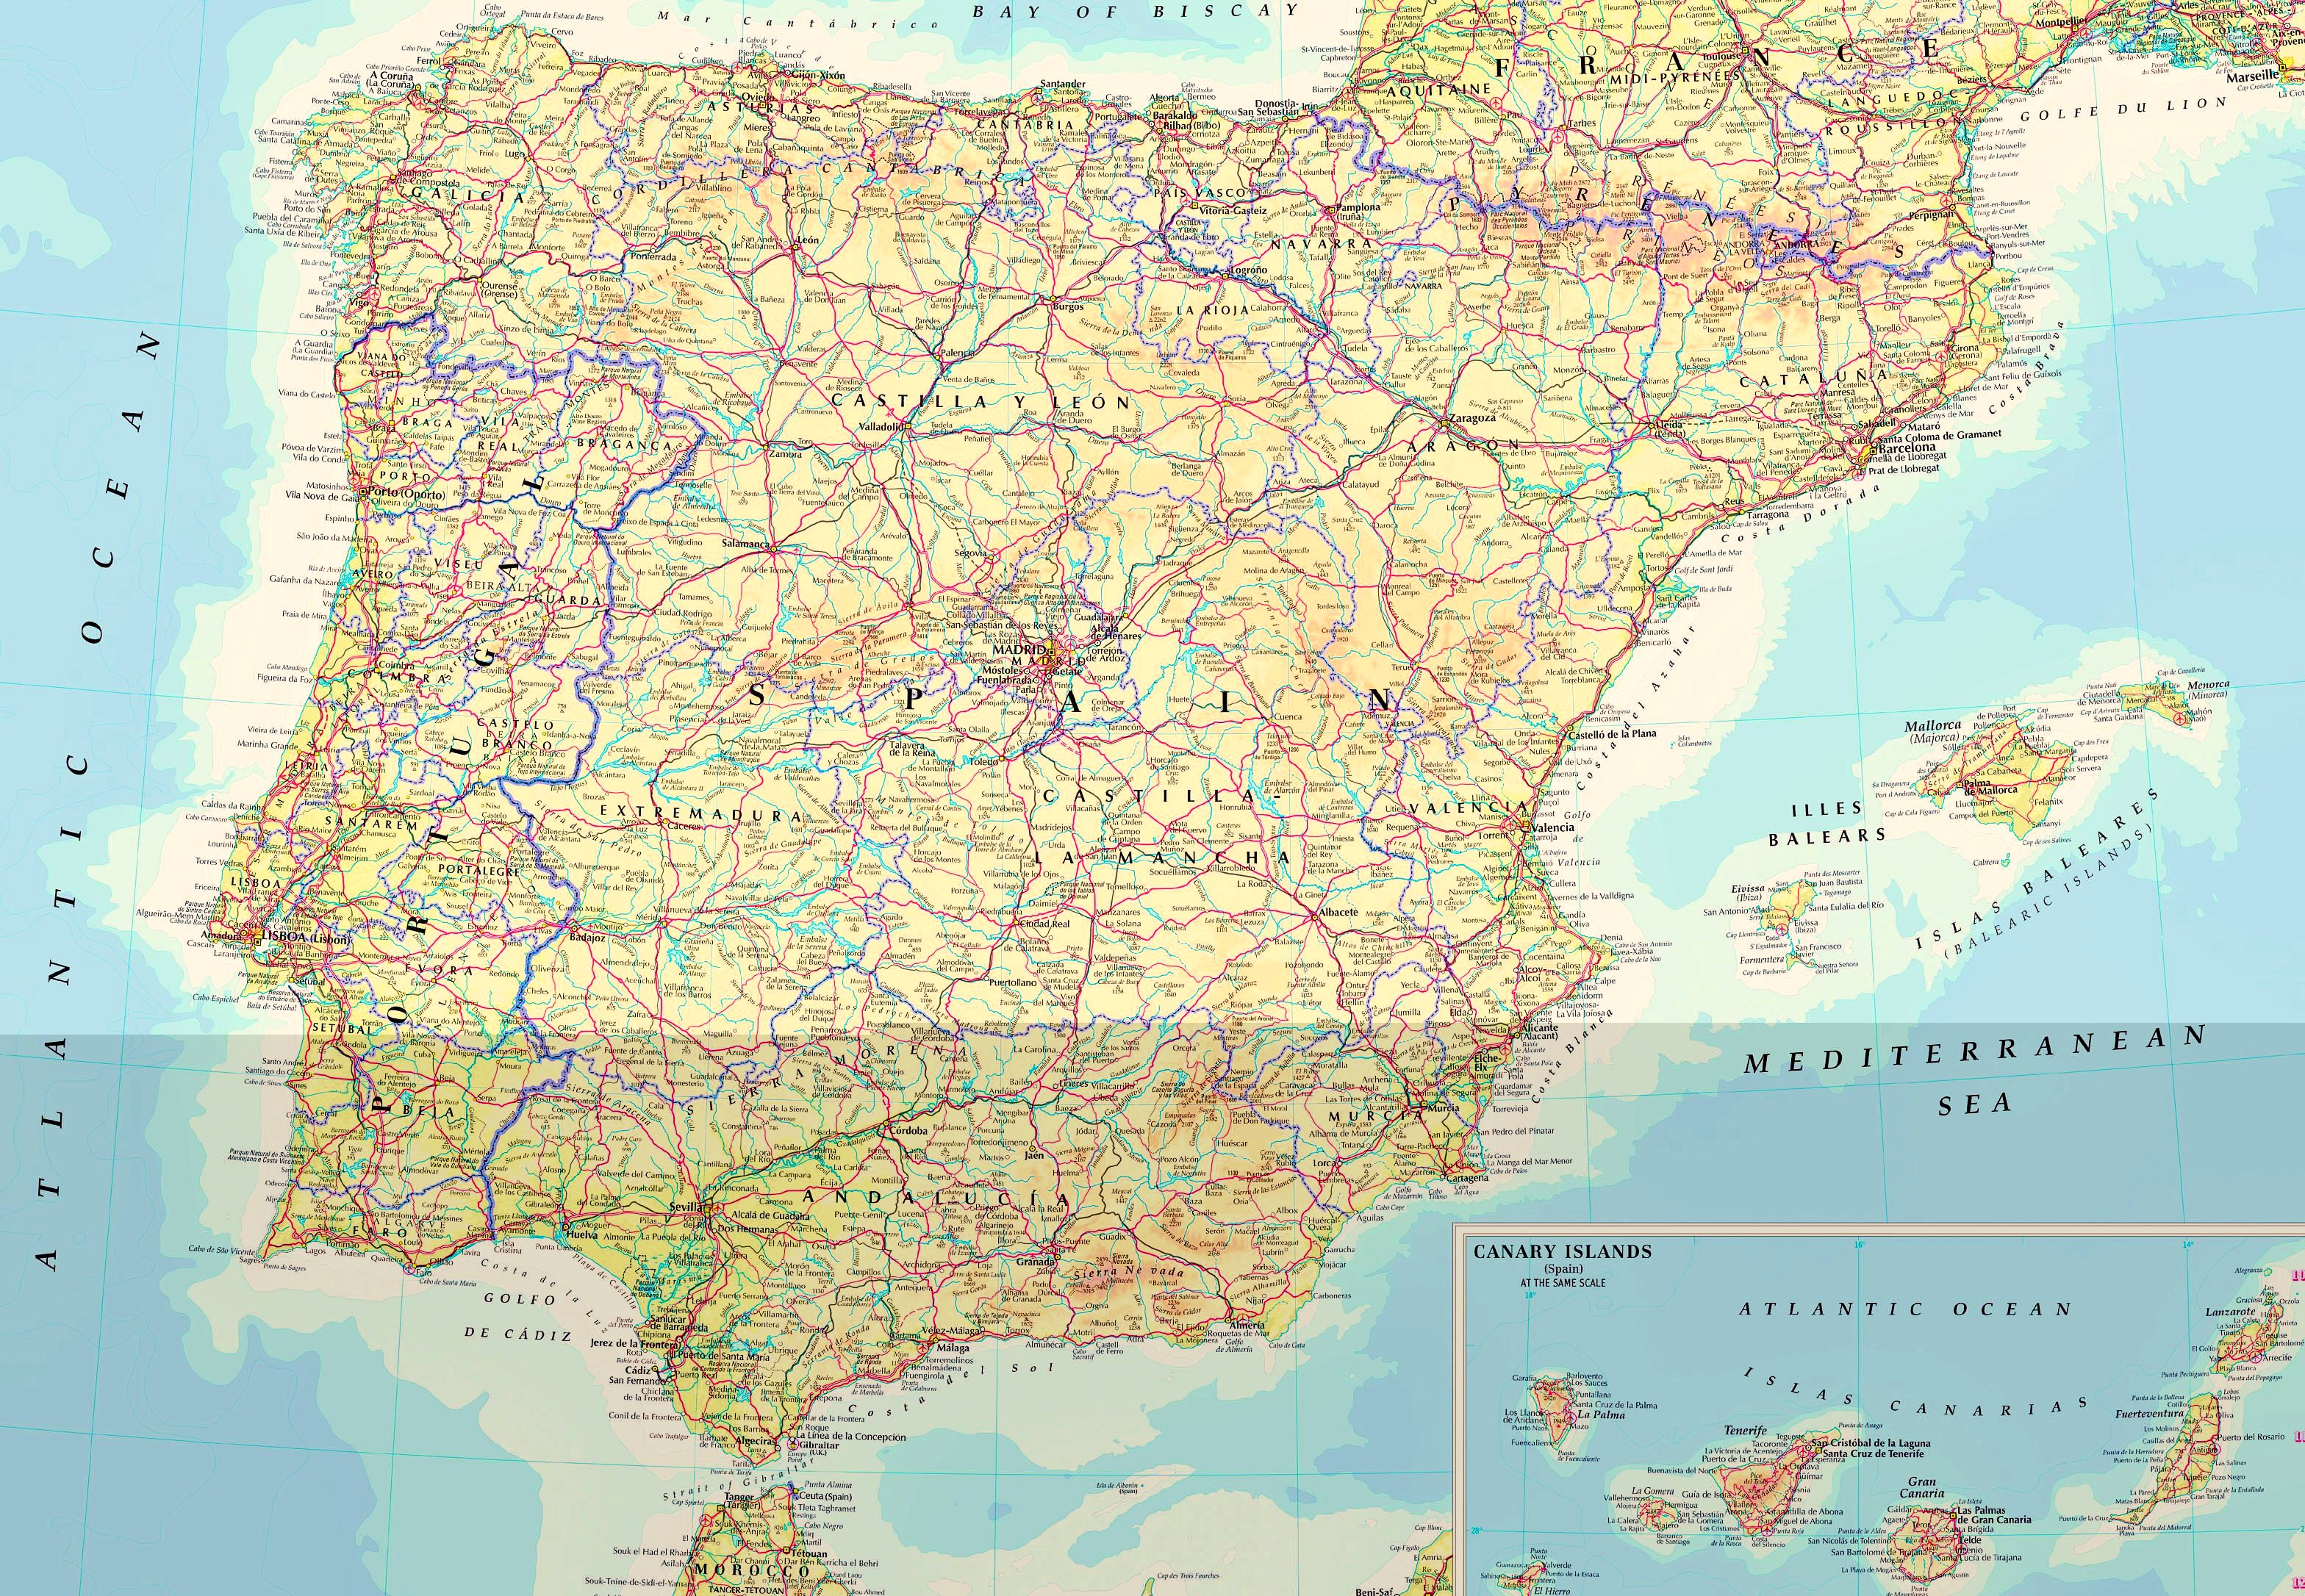 Road map of Spain and Portugal 